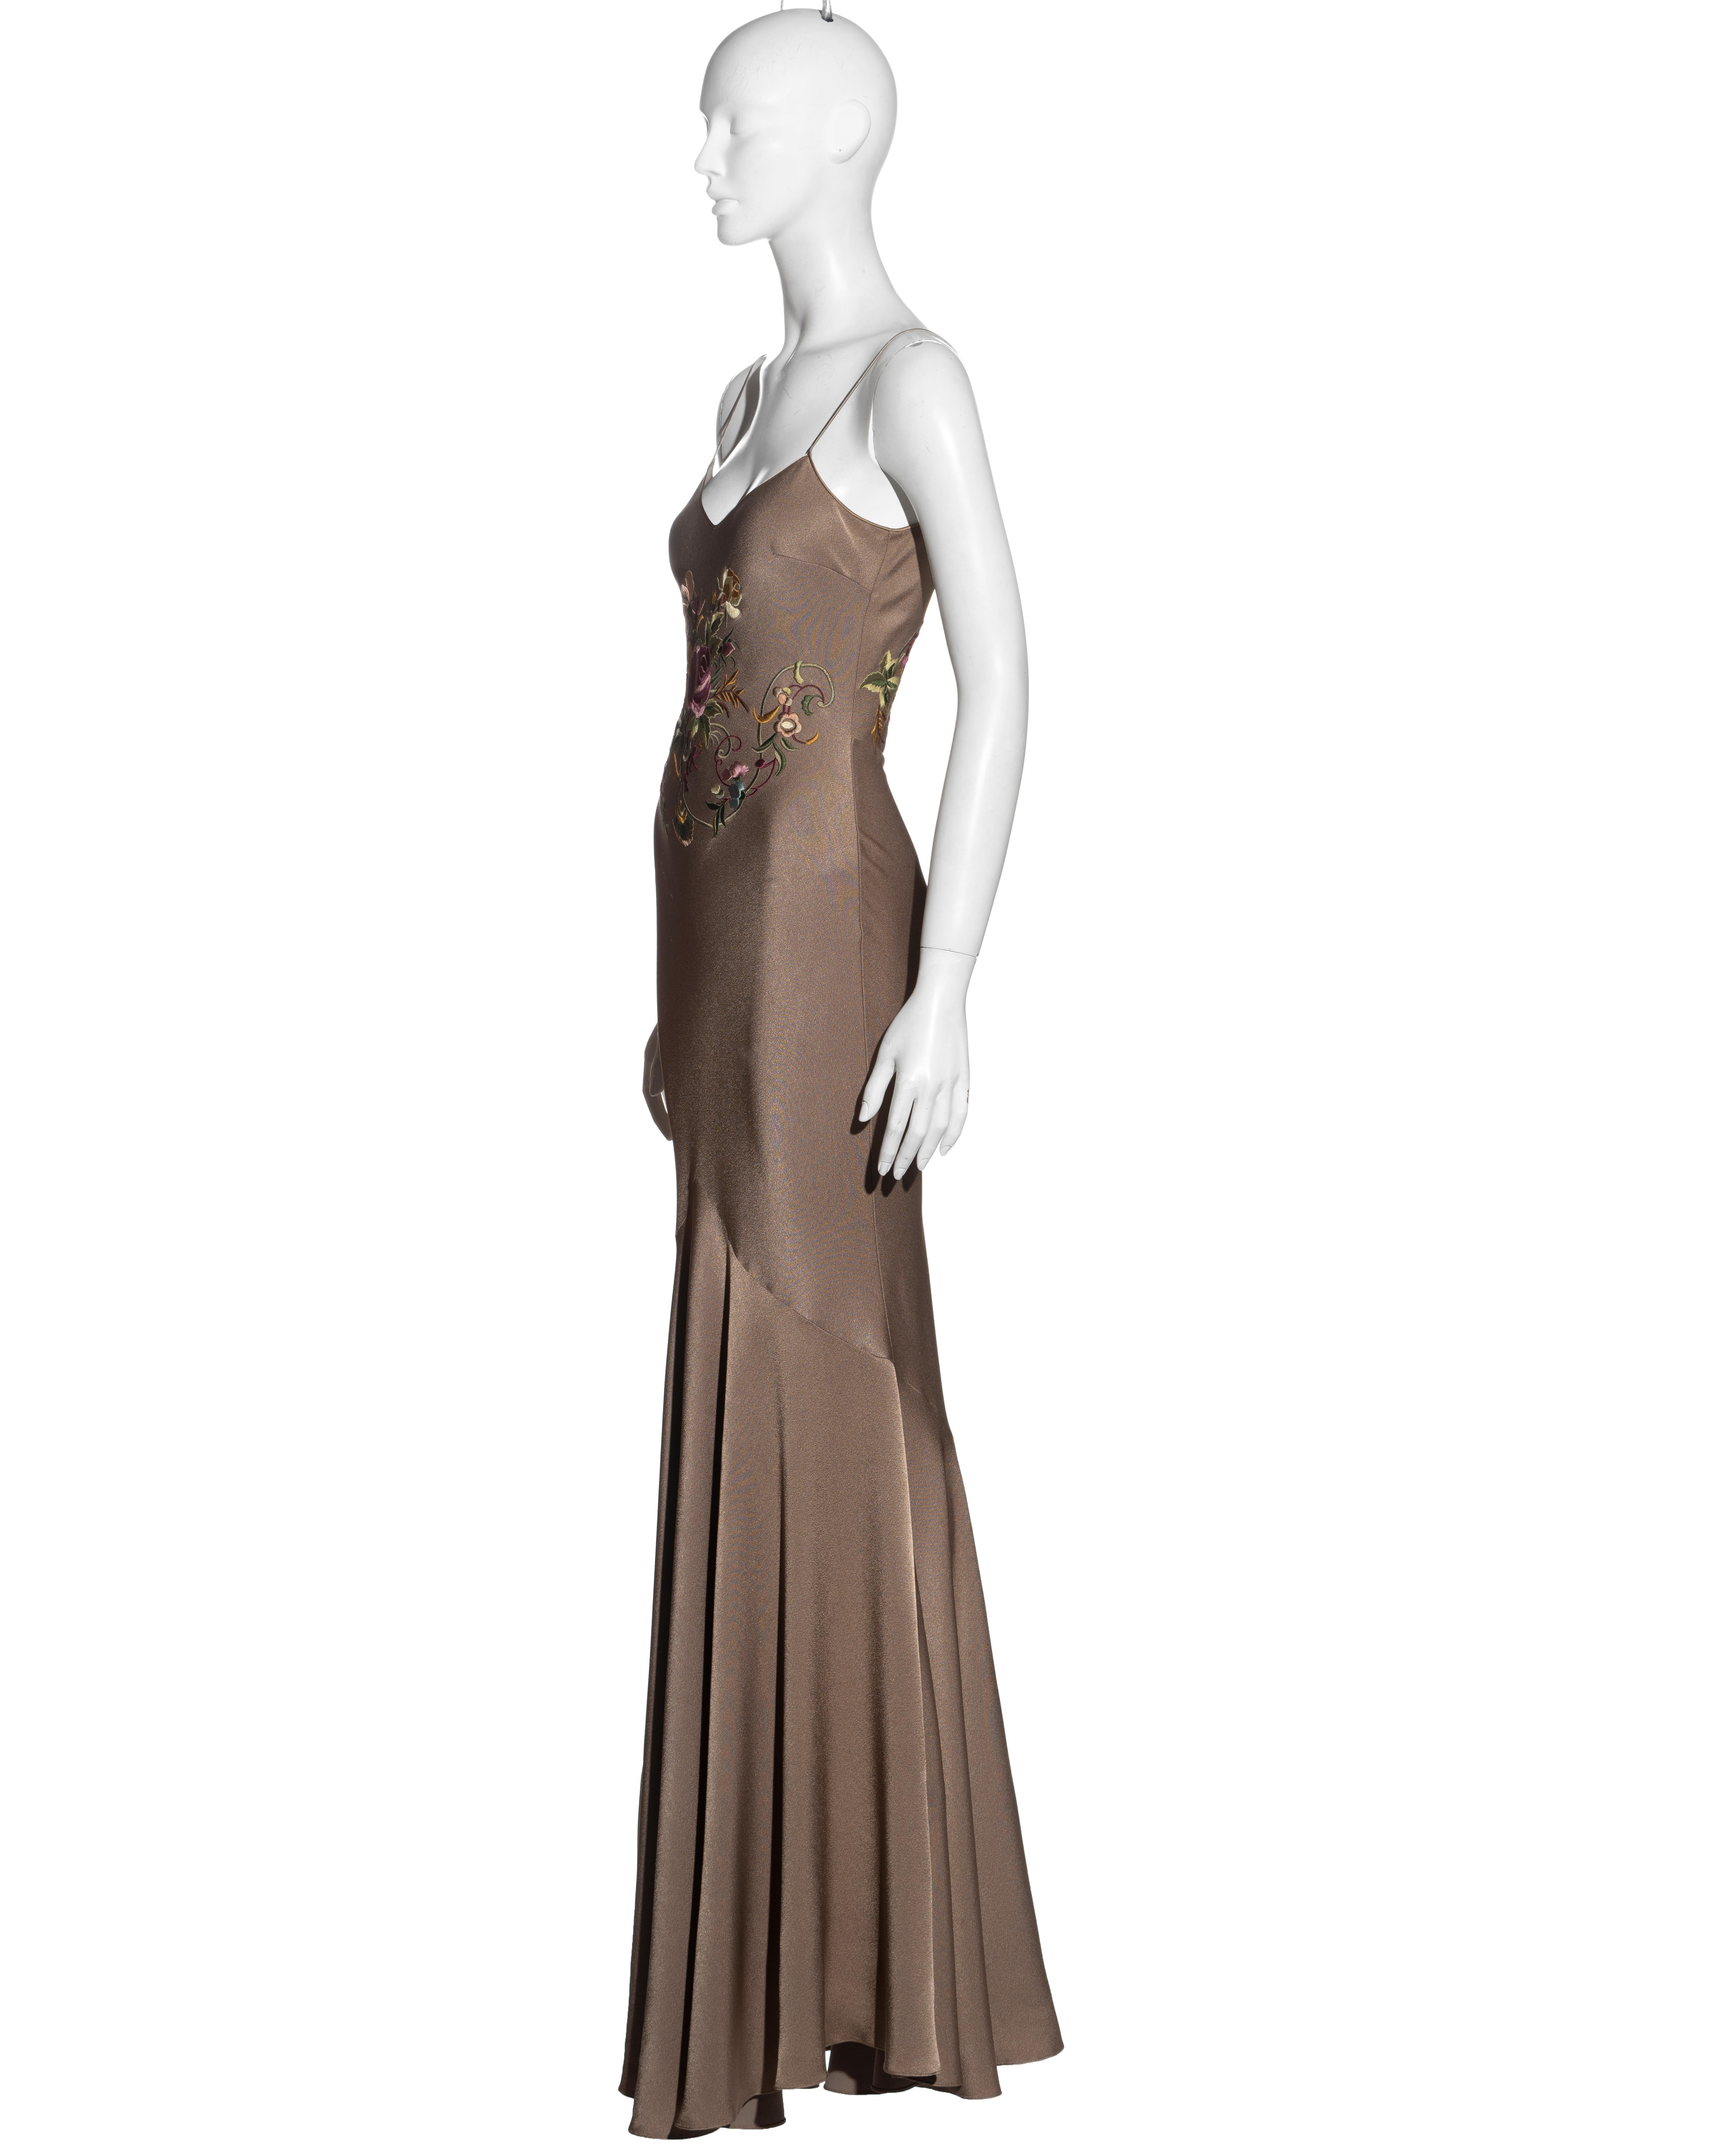 John Galliano taupe satin crepe evening dress with floral embroidery, ss 2003 In Excellent Condition For Sale In London, GB